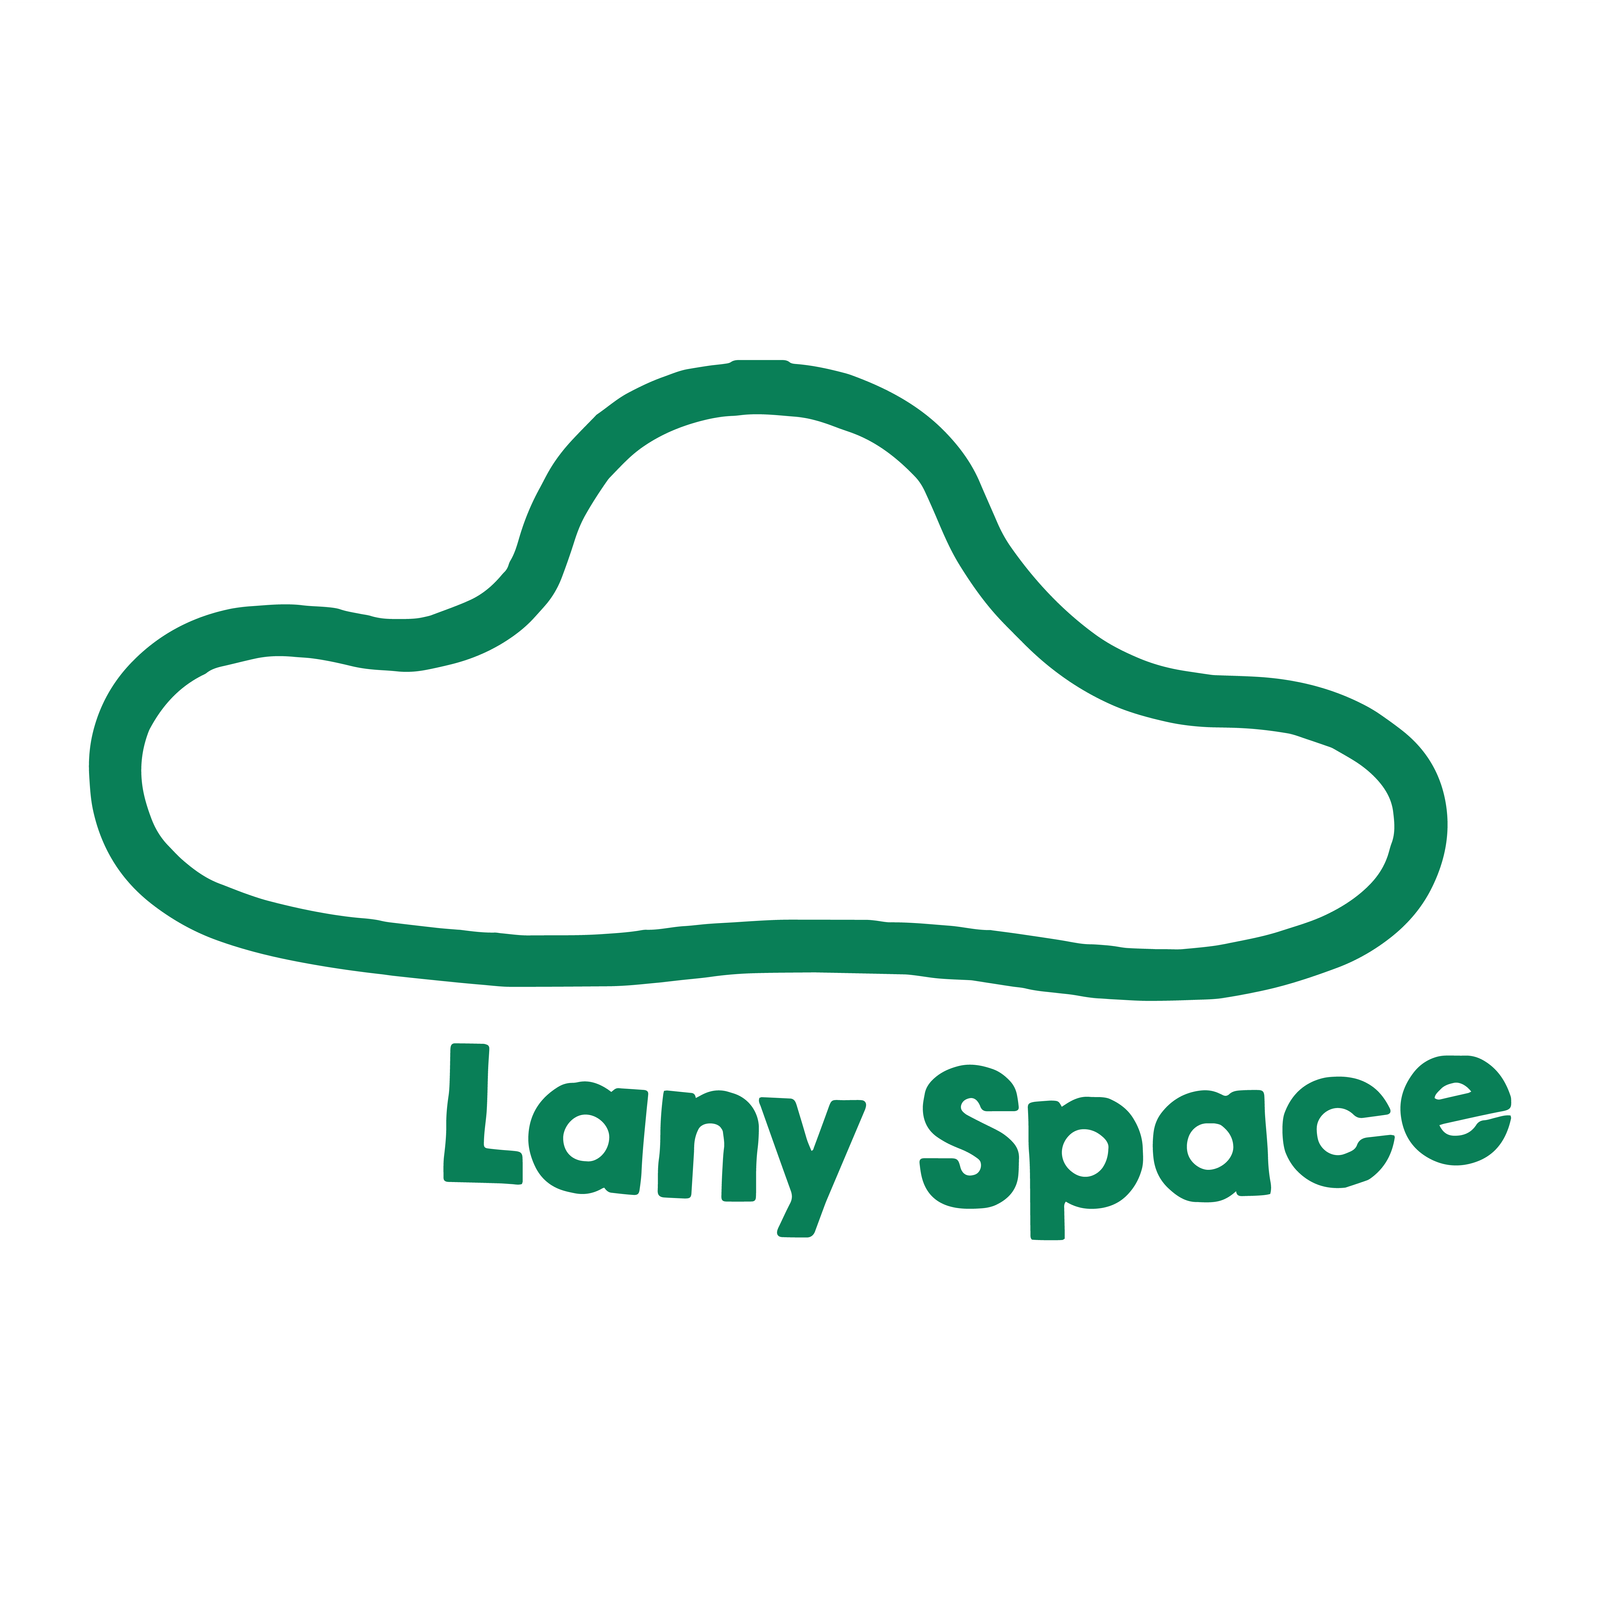 Save & Enjoy a Flat 10% Off with Lany Space Coupon Code!